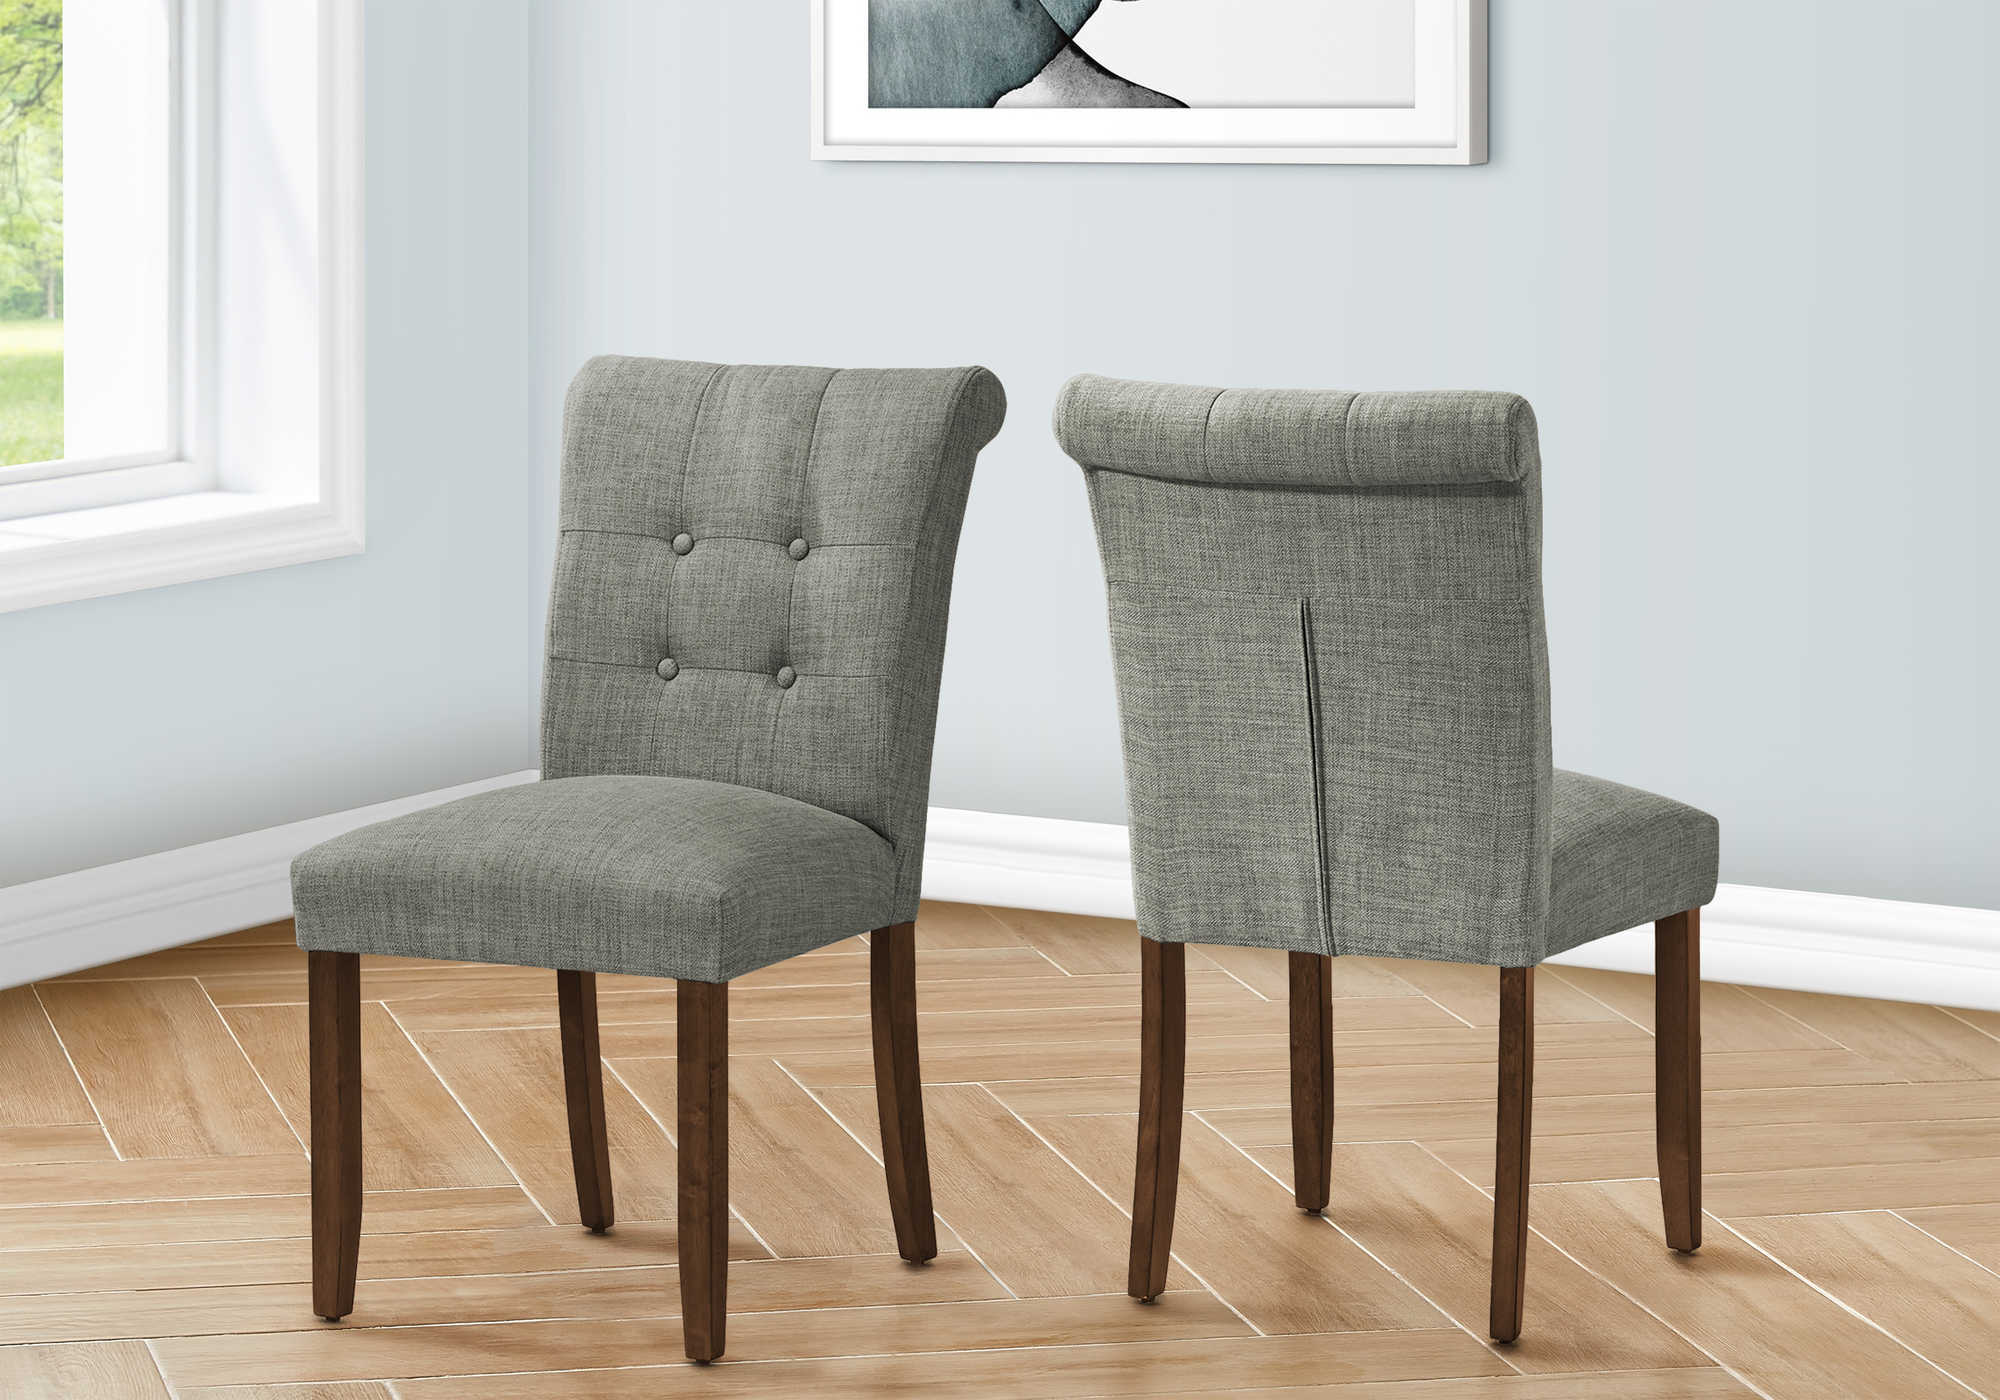 DINING CHAIR - 2PCS / 38"H UPHOLSTERED GREY FABRIC